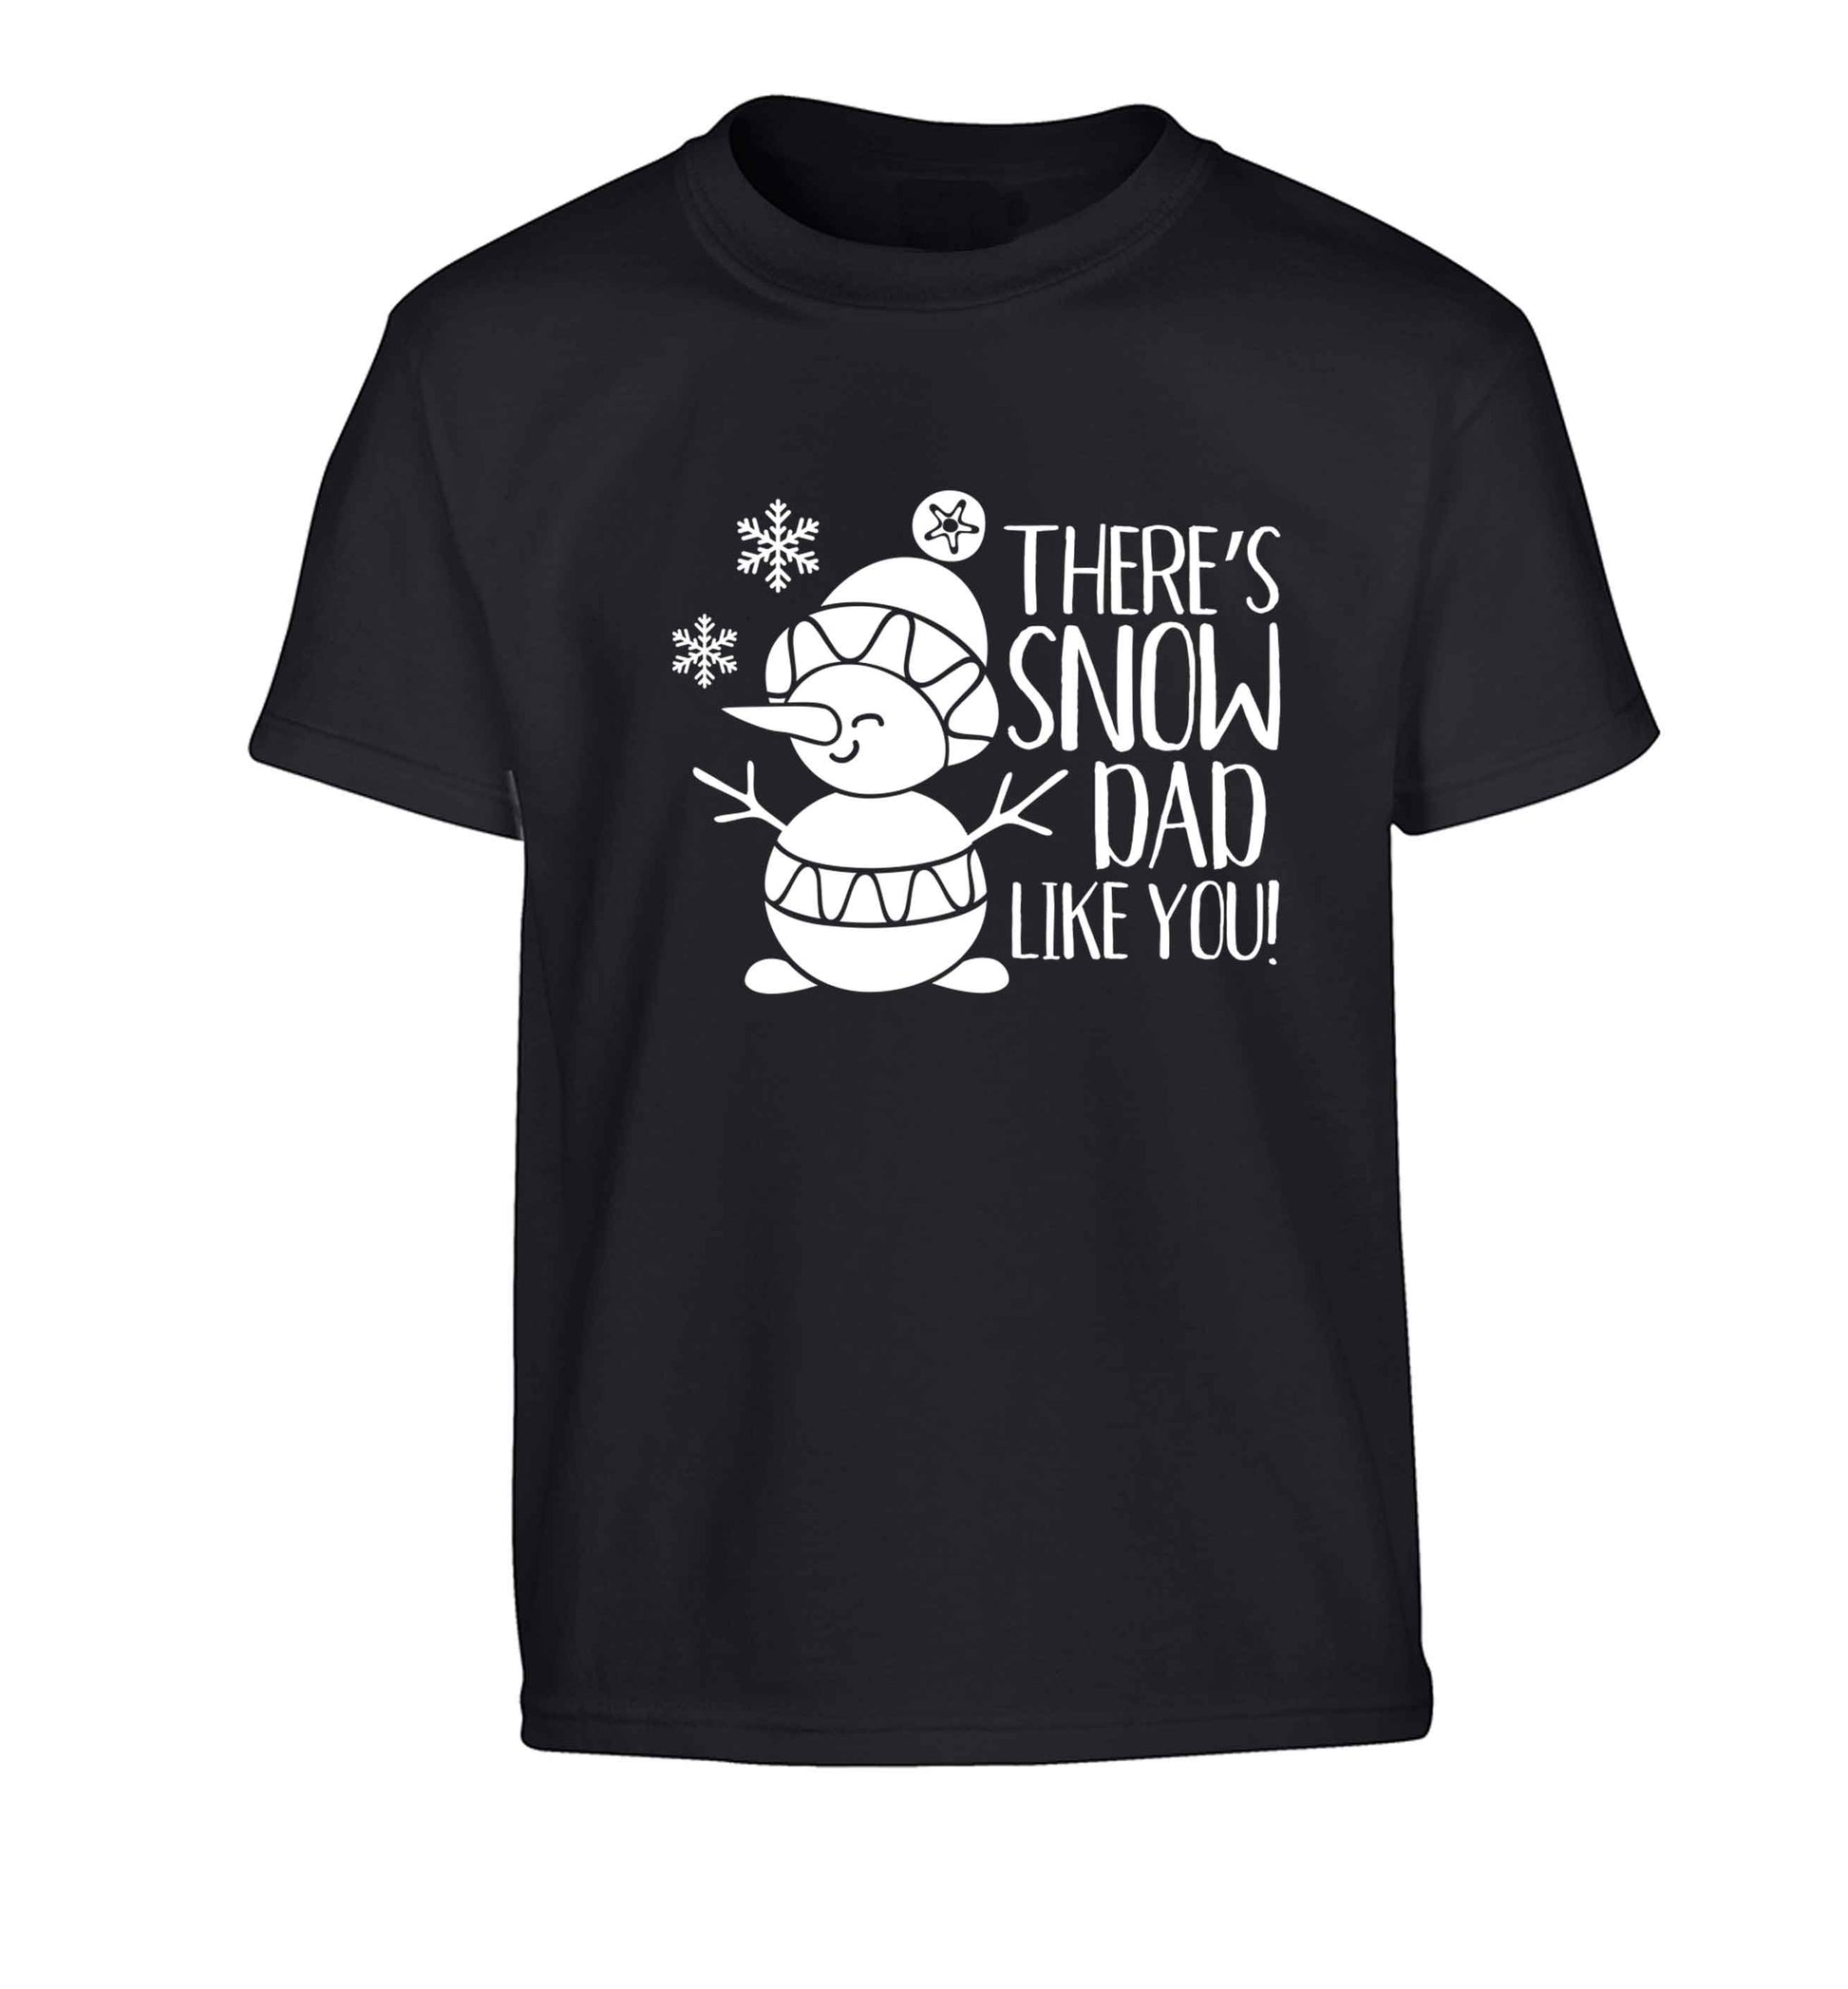 There's snow dad like you Children's black Tshirt 12-13 Years